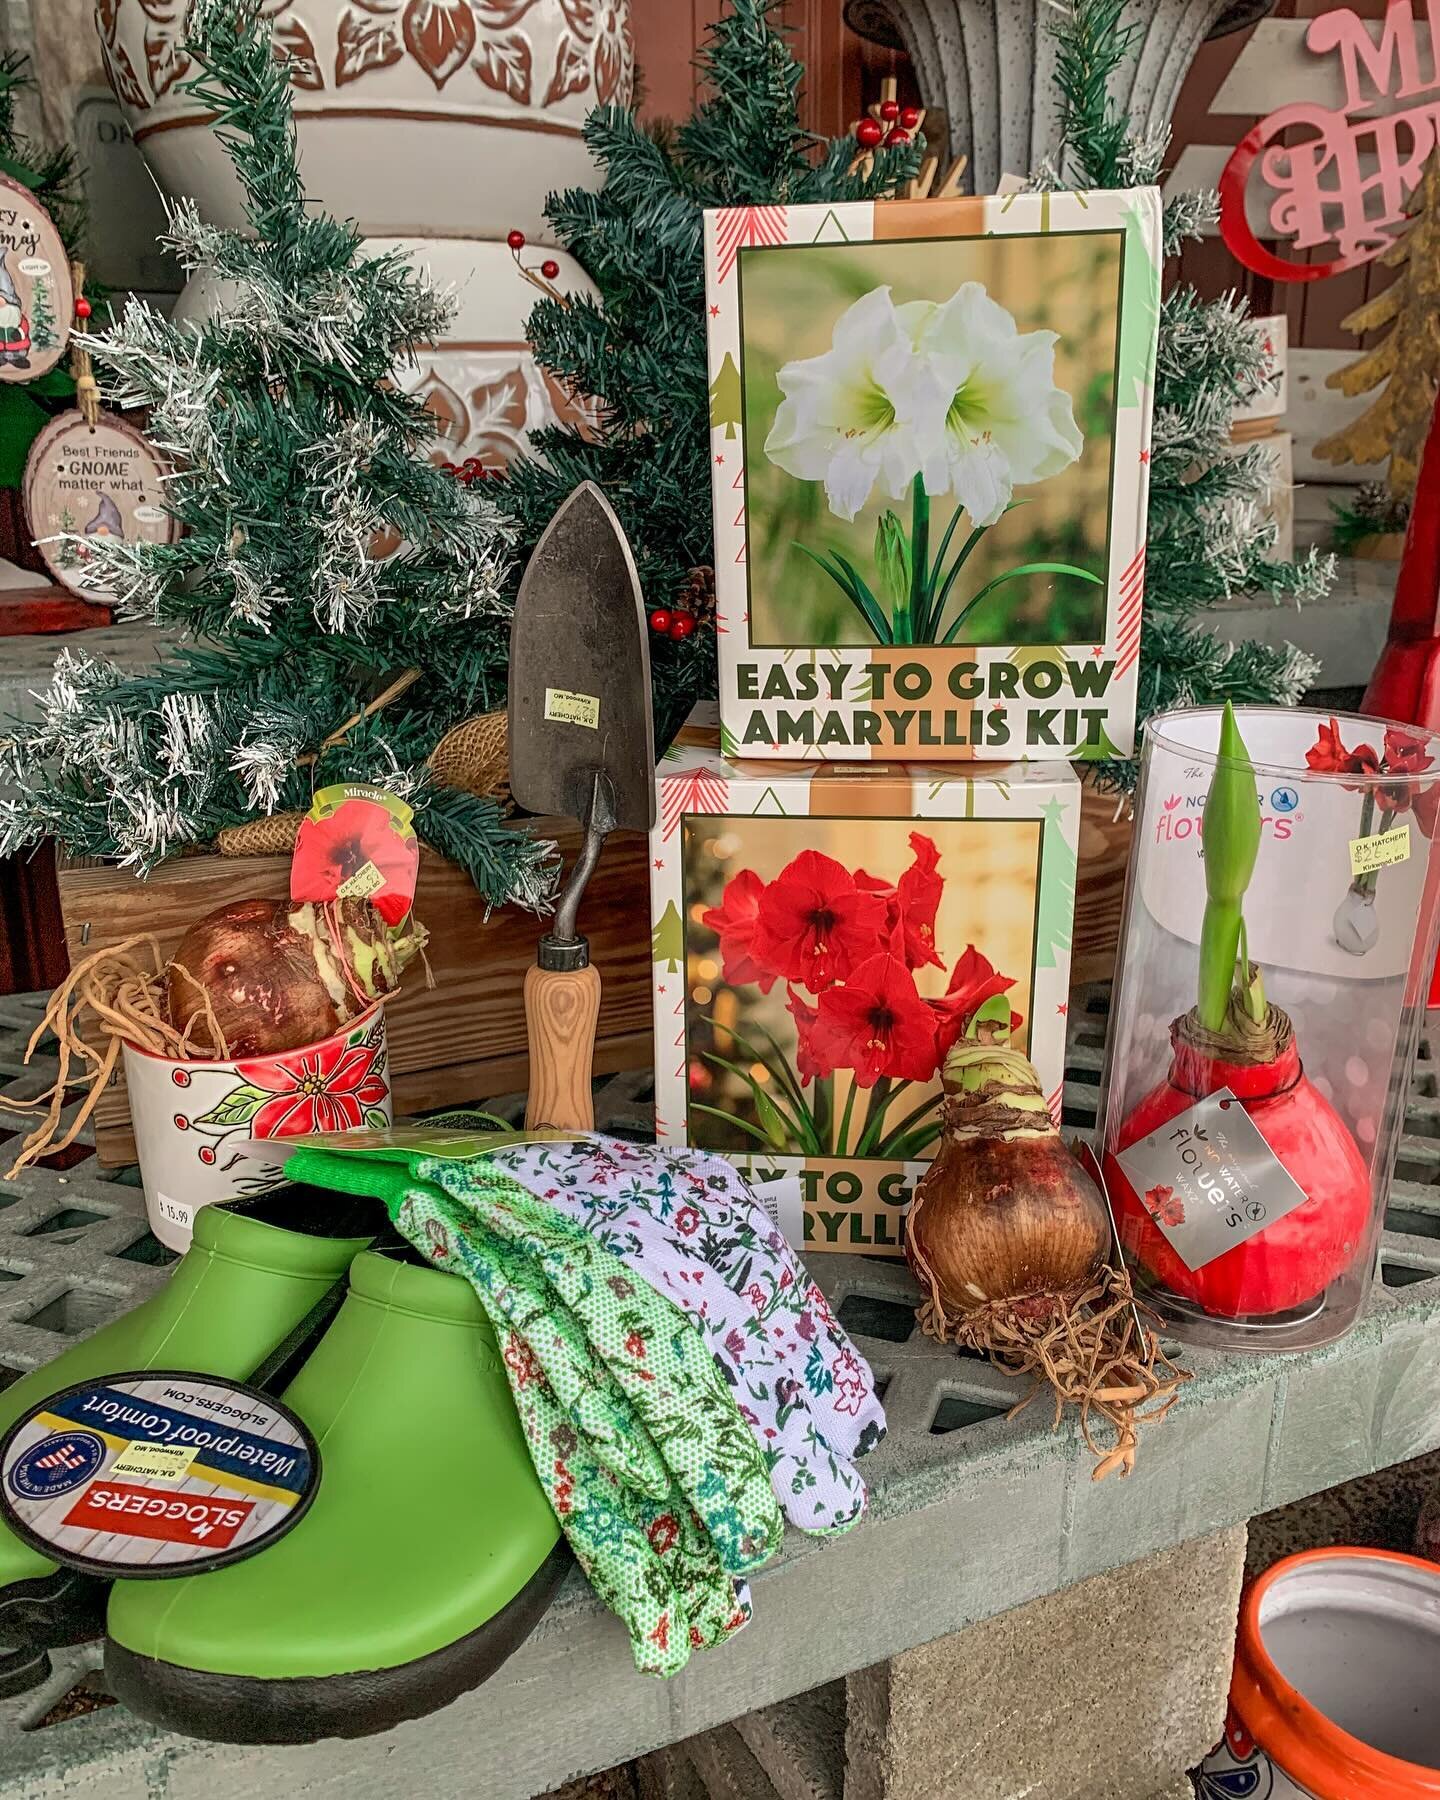 Give the gift of a hobby this Christmas🎄! From feeding the birds🐤, to planting a beautiful garden🪴! There&rsquo;s tons of fun activities for all to enjoy here at OK!